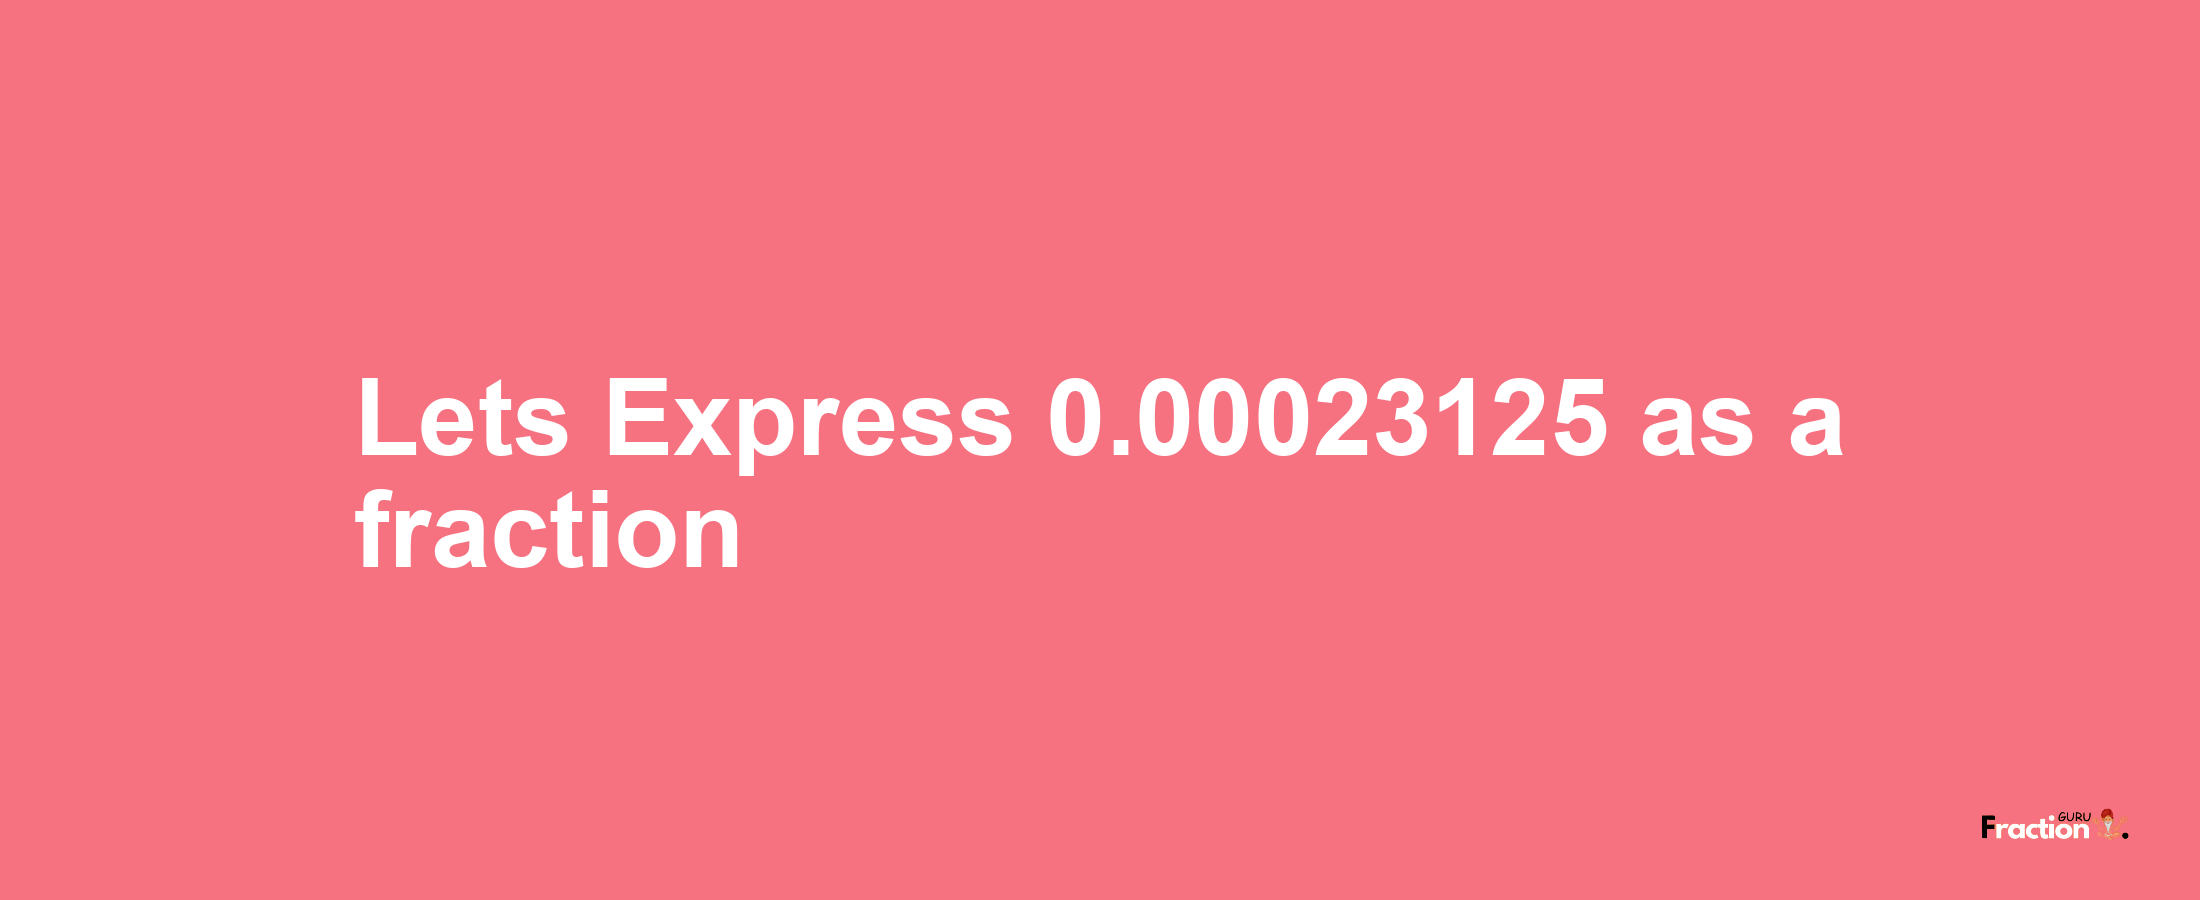 Lets Express 0.00023125 as afraction